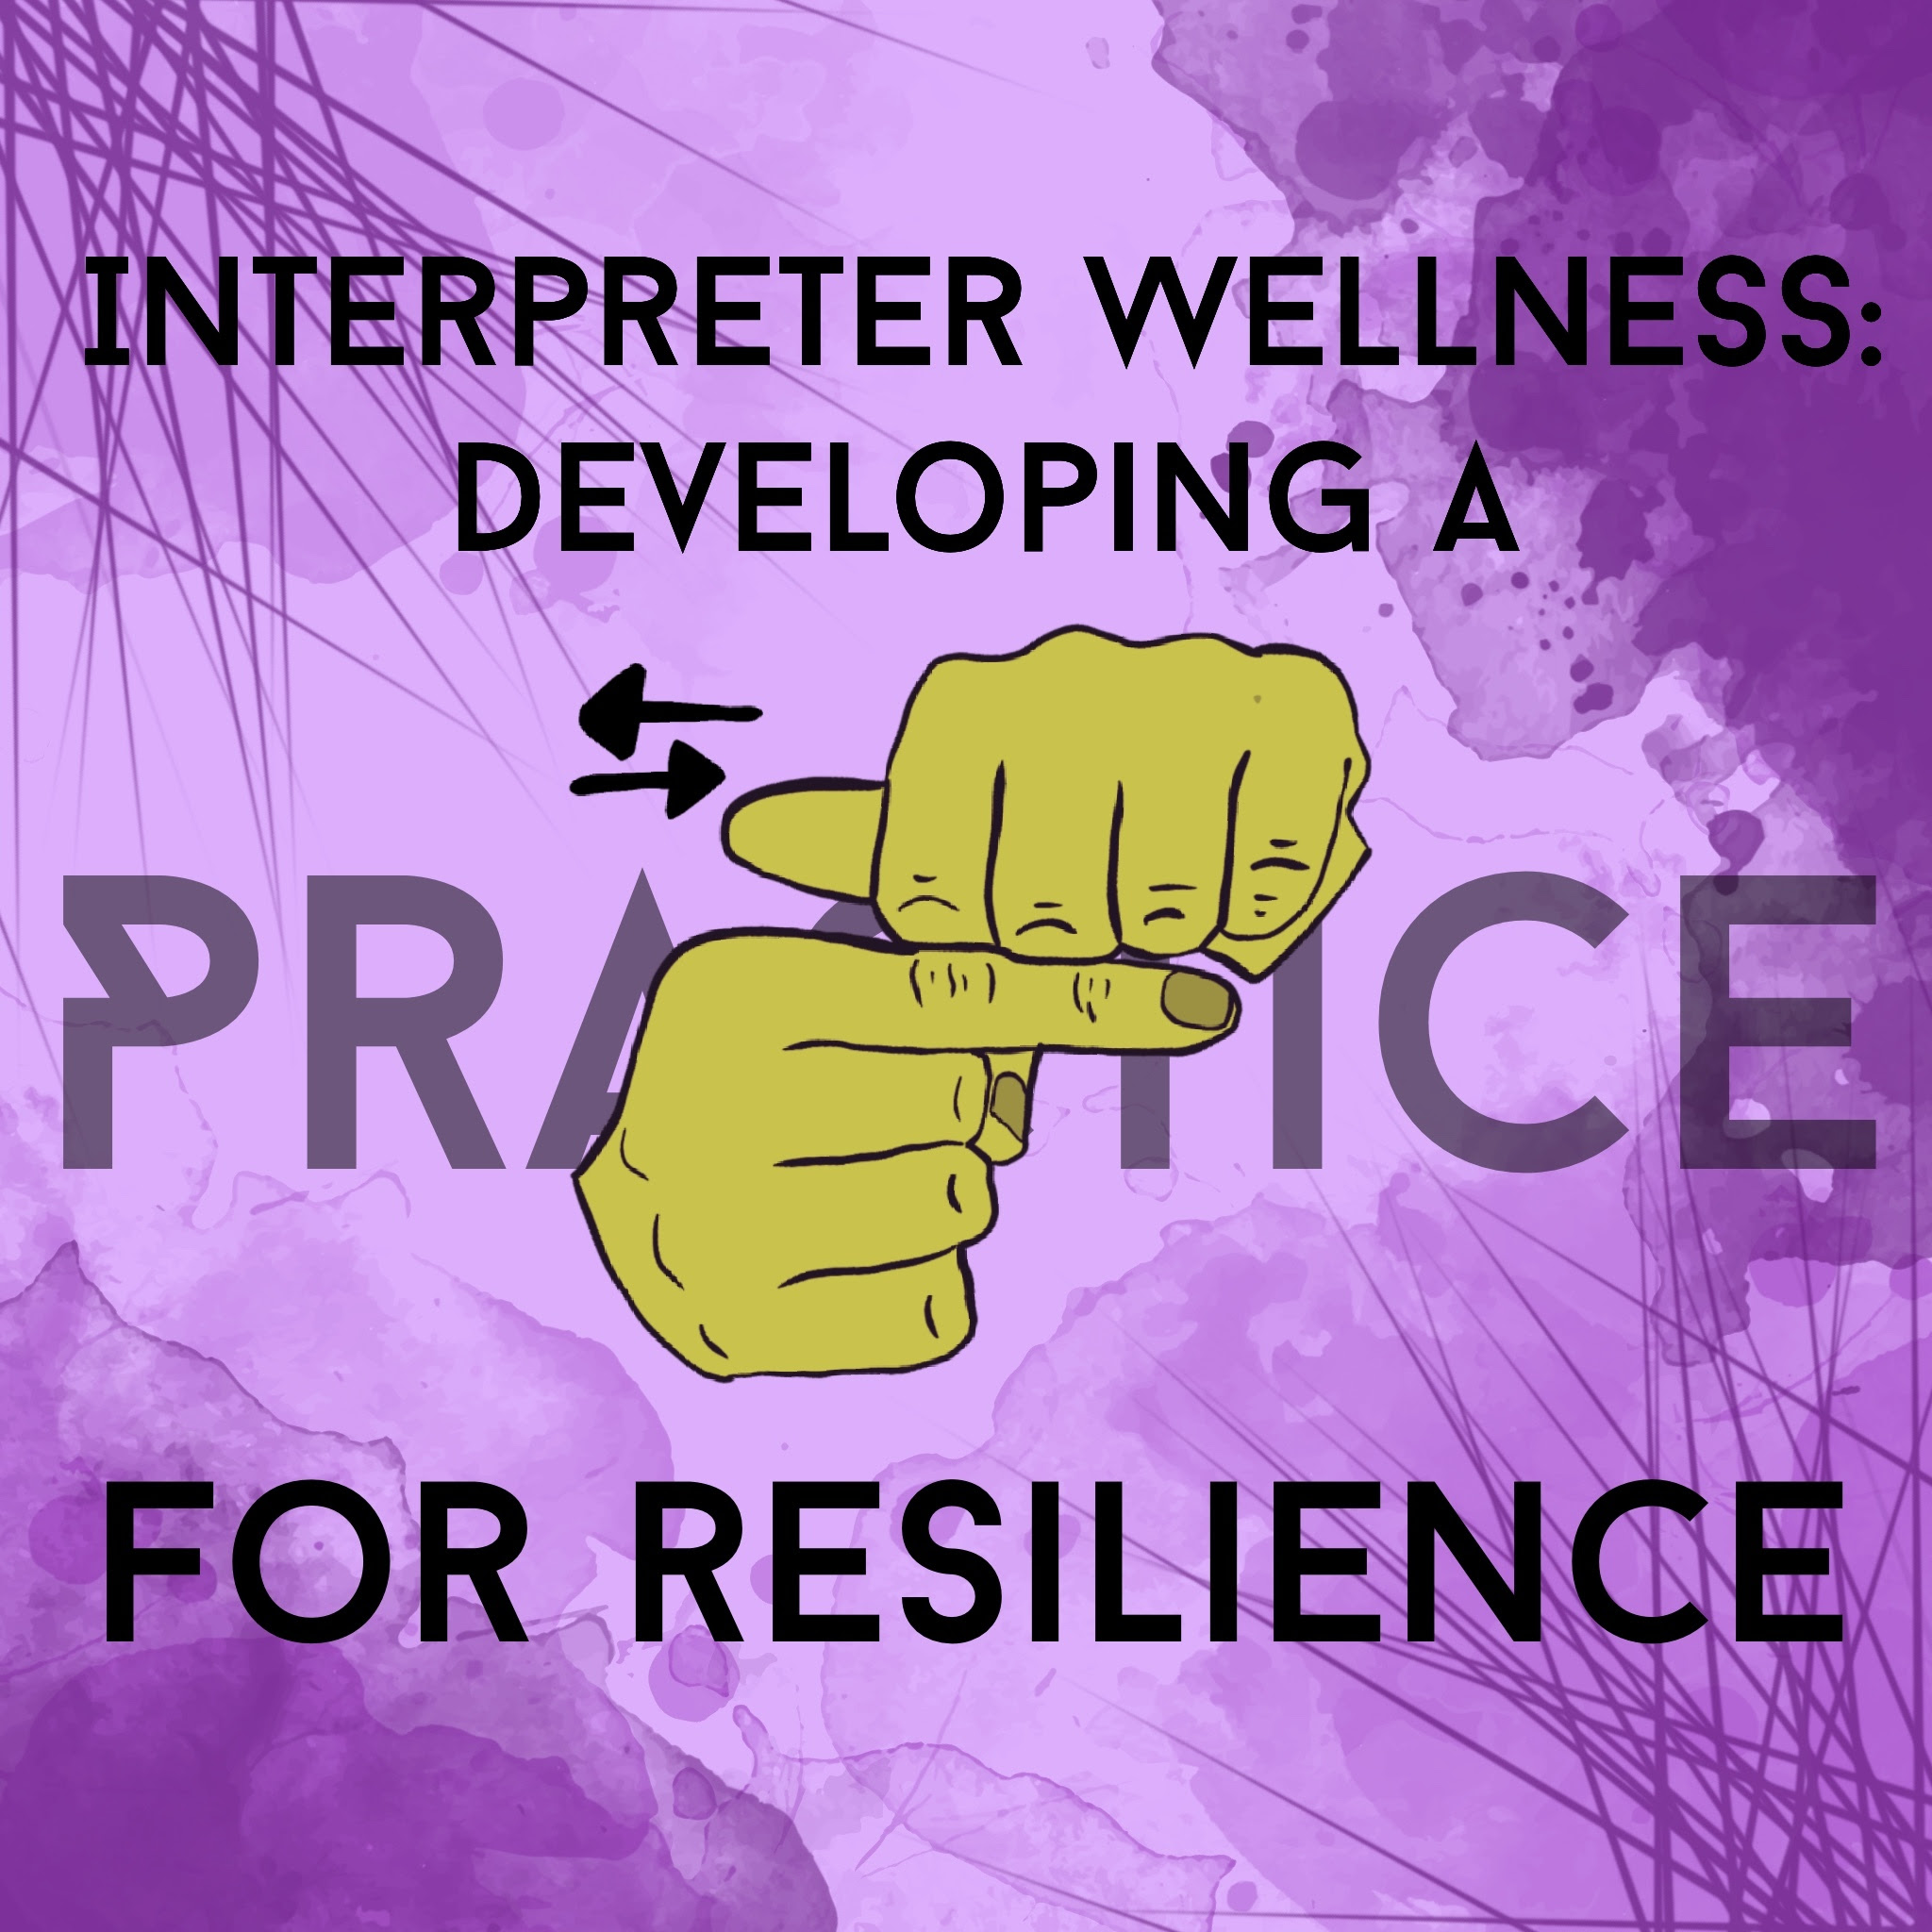 Image of green hands signing practice on a purple background with darker purple smudges and lines and black text of "Interpreter Wellness: Developing A Practice for Resilience" with sign language that said Practice